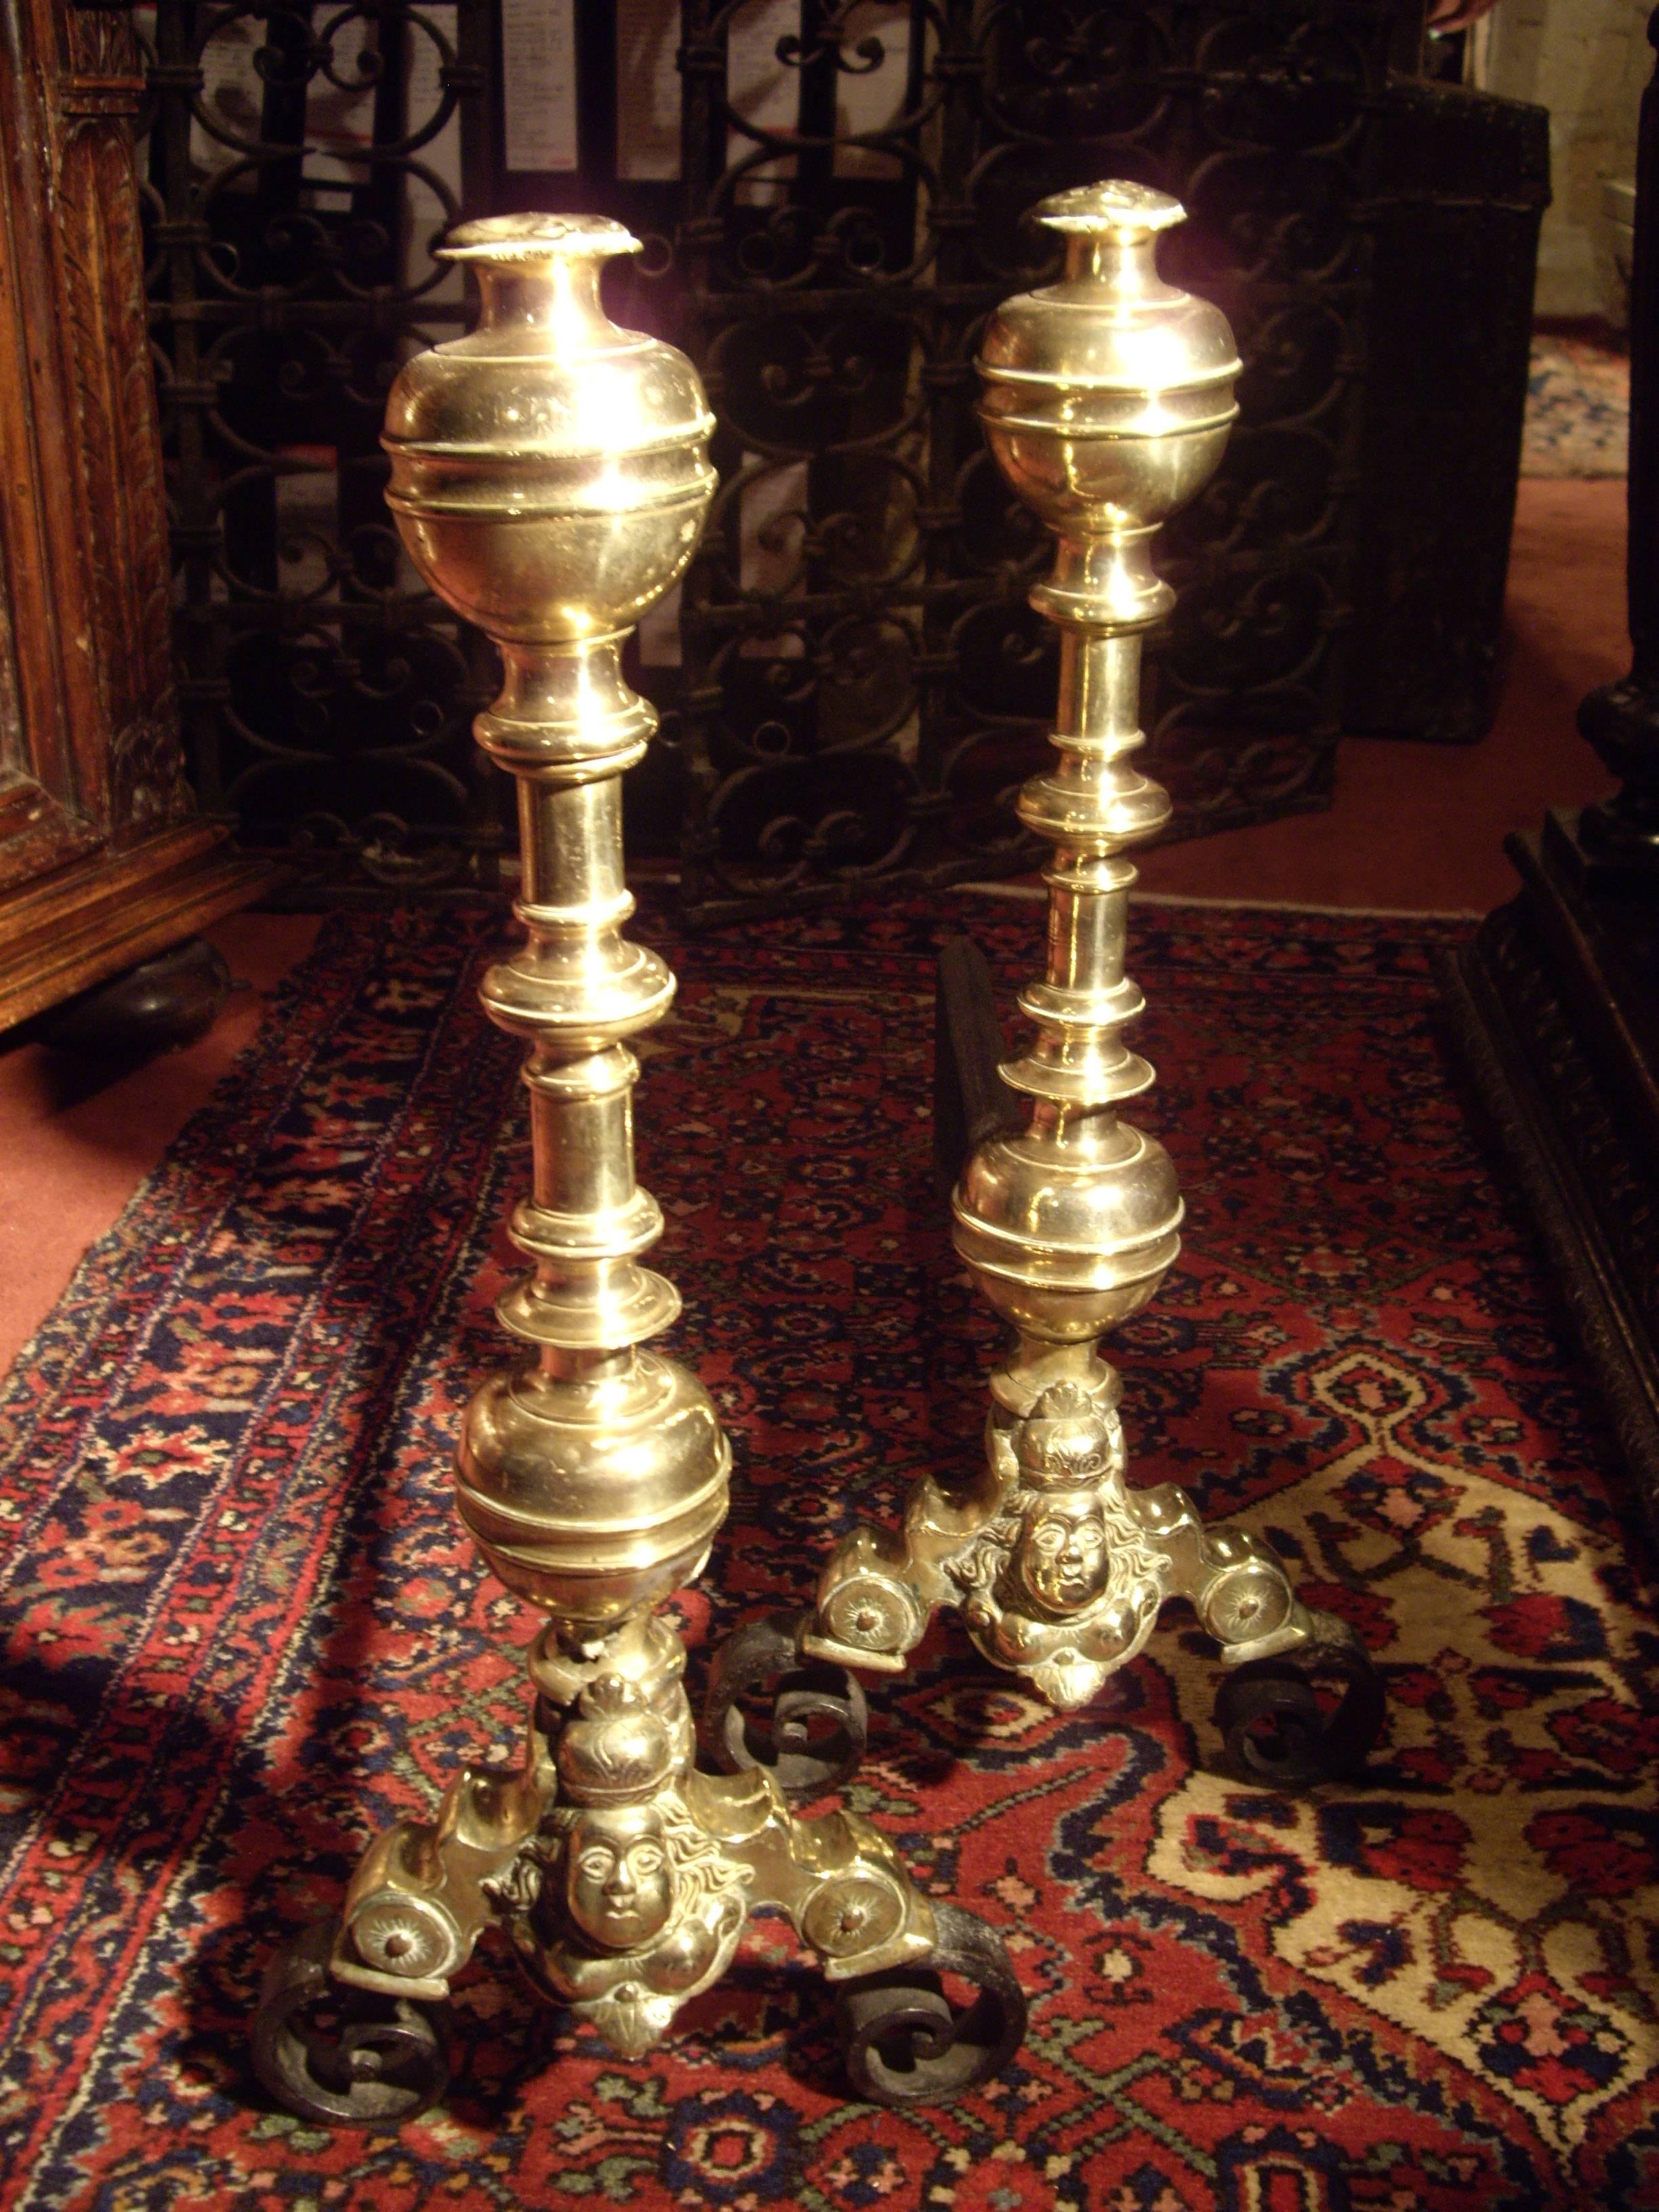 ORIGIN : FRANCE
PERIOD : 17th CENTURY

Height : 57.5 cm
Width : 55.5 cm
Depth : 25 cm
 
Gilded Bronze

On a base made of two wrought iron feet shaped as nice volutes, we can enjoy an ornamenation made of a quaint figure and a godrooned stem with a